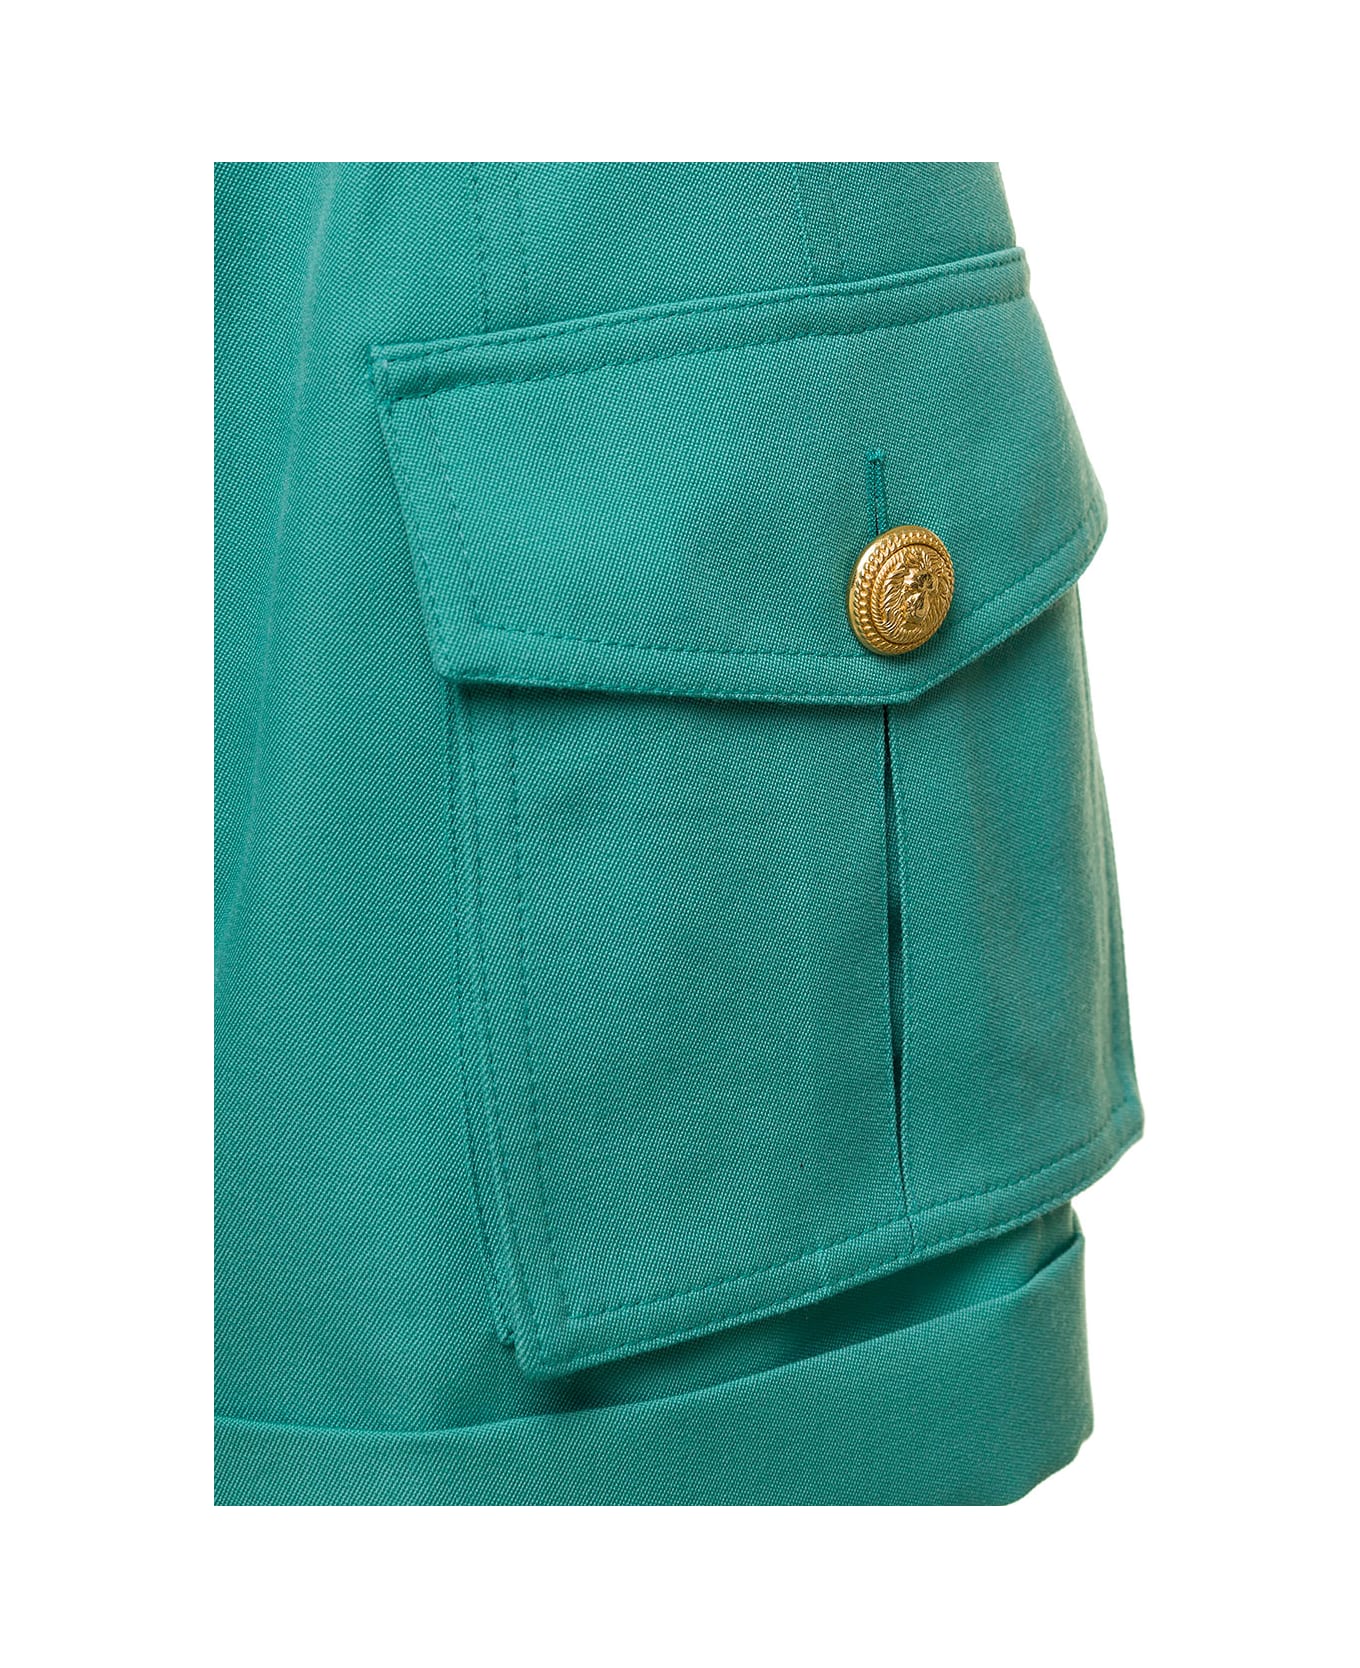 Balmain Light Blue Shorts With Cuff And Jewel Buttons In Wool Woman - Green